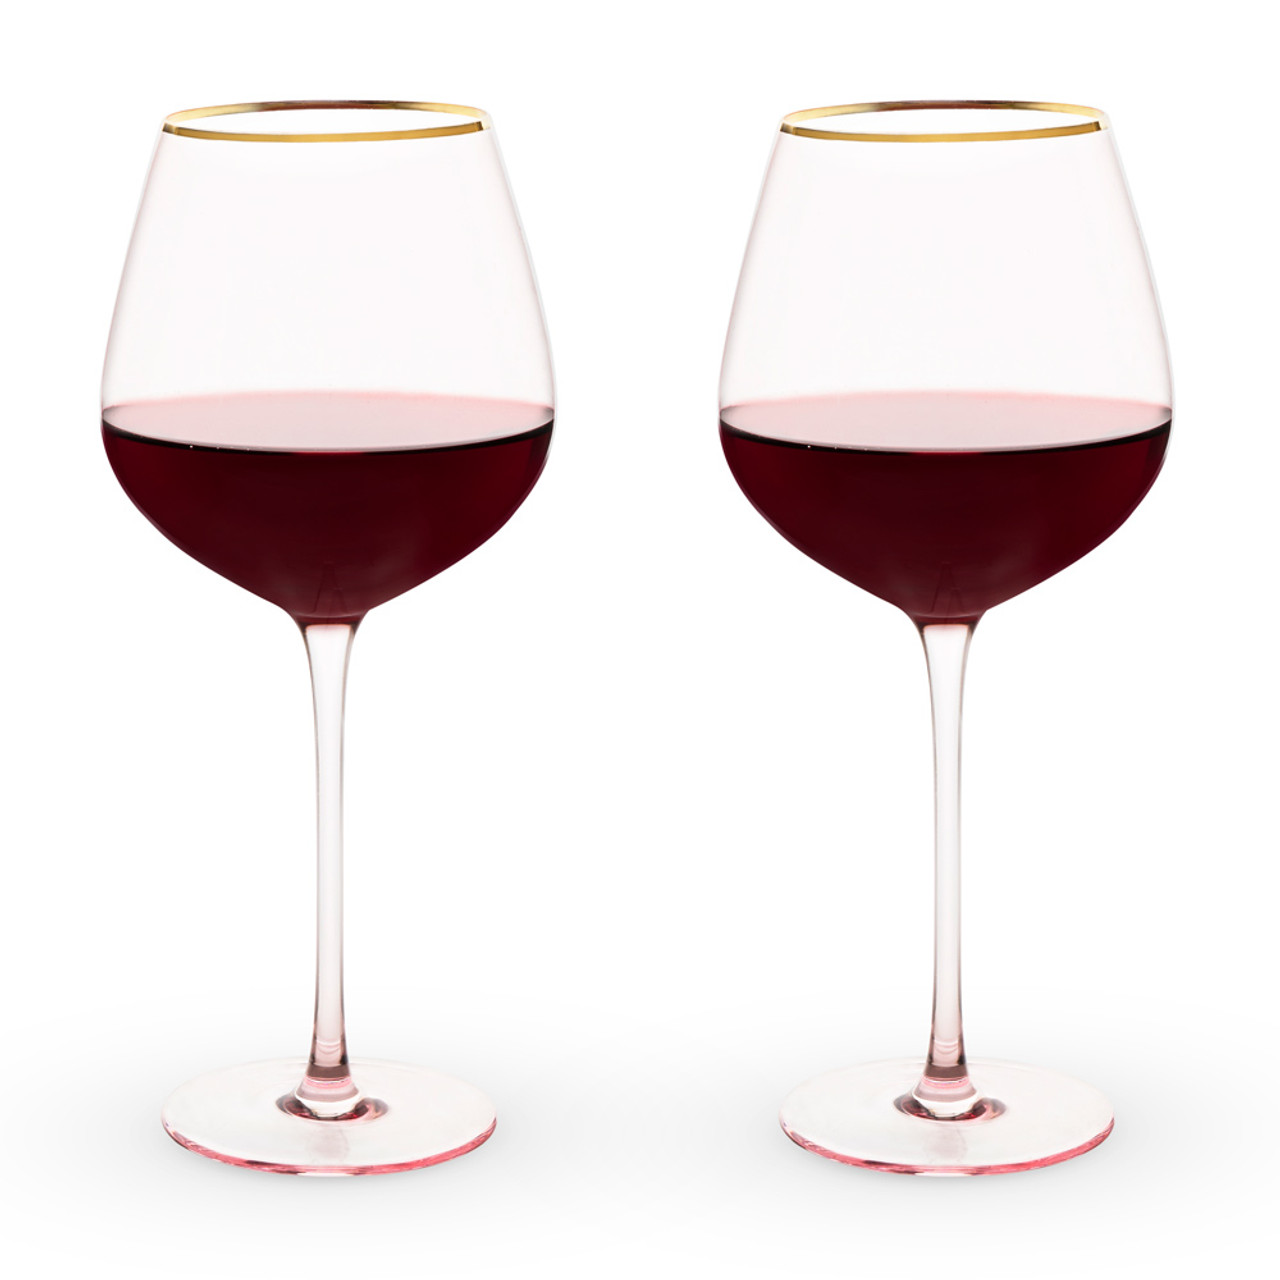 https://cdn11.bigcommerce.com/s-cznxq08r7/images/stencil/1280x1280/products/1605/3035/6162-red-rose-tinted-crystal-red-wine-glasses-with-gold-rims-20-oz-set-of-2_02__57582.1590768371.jpg?c=1